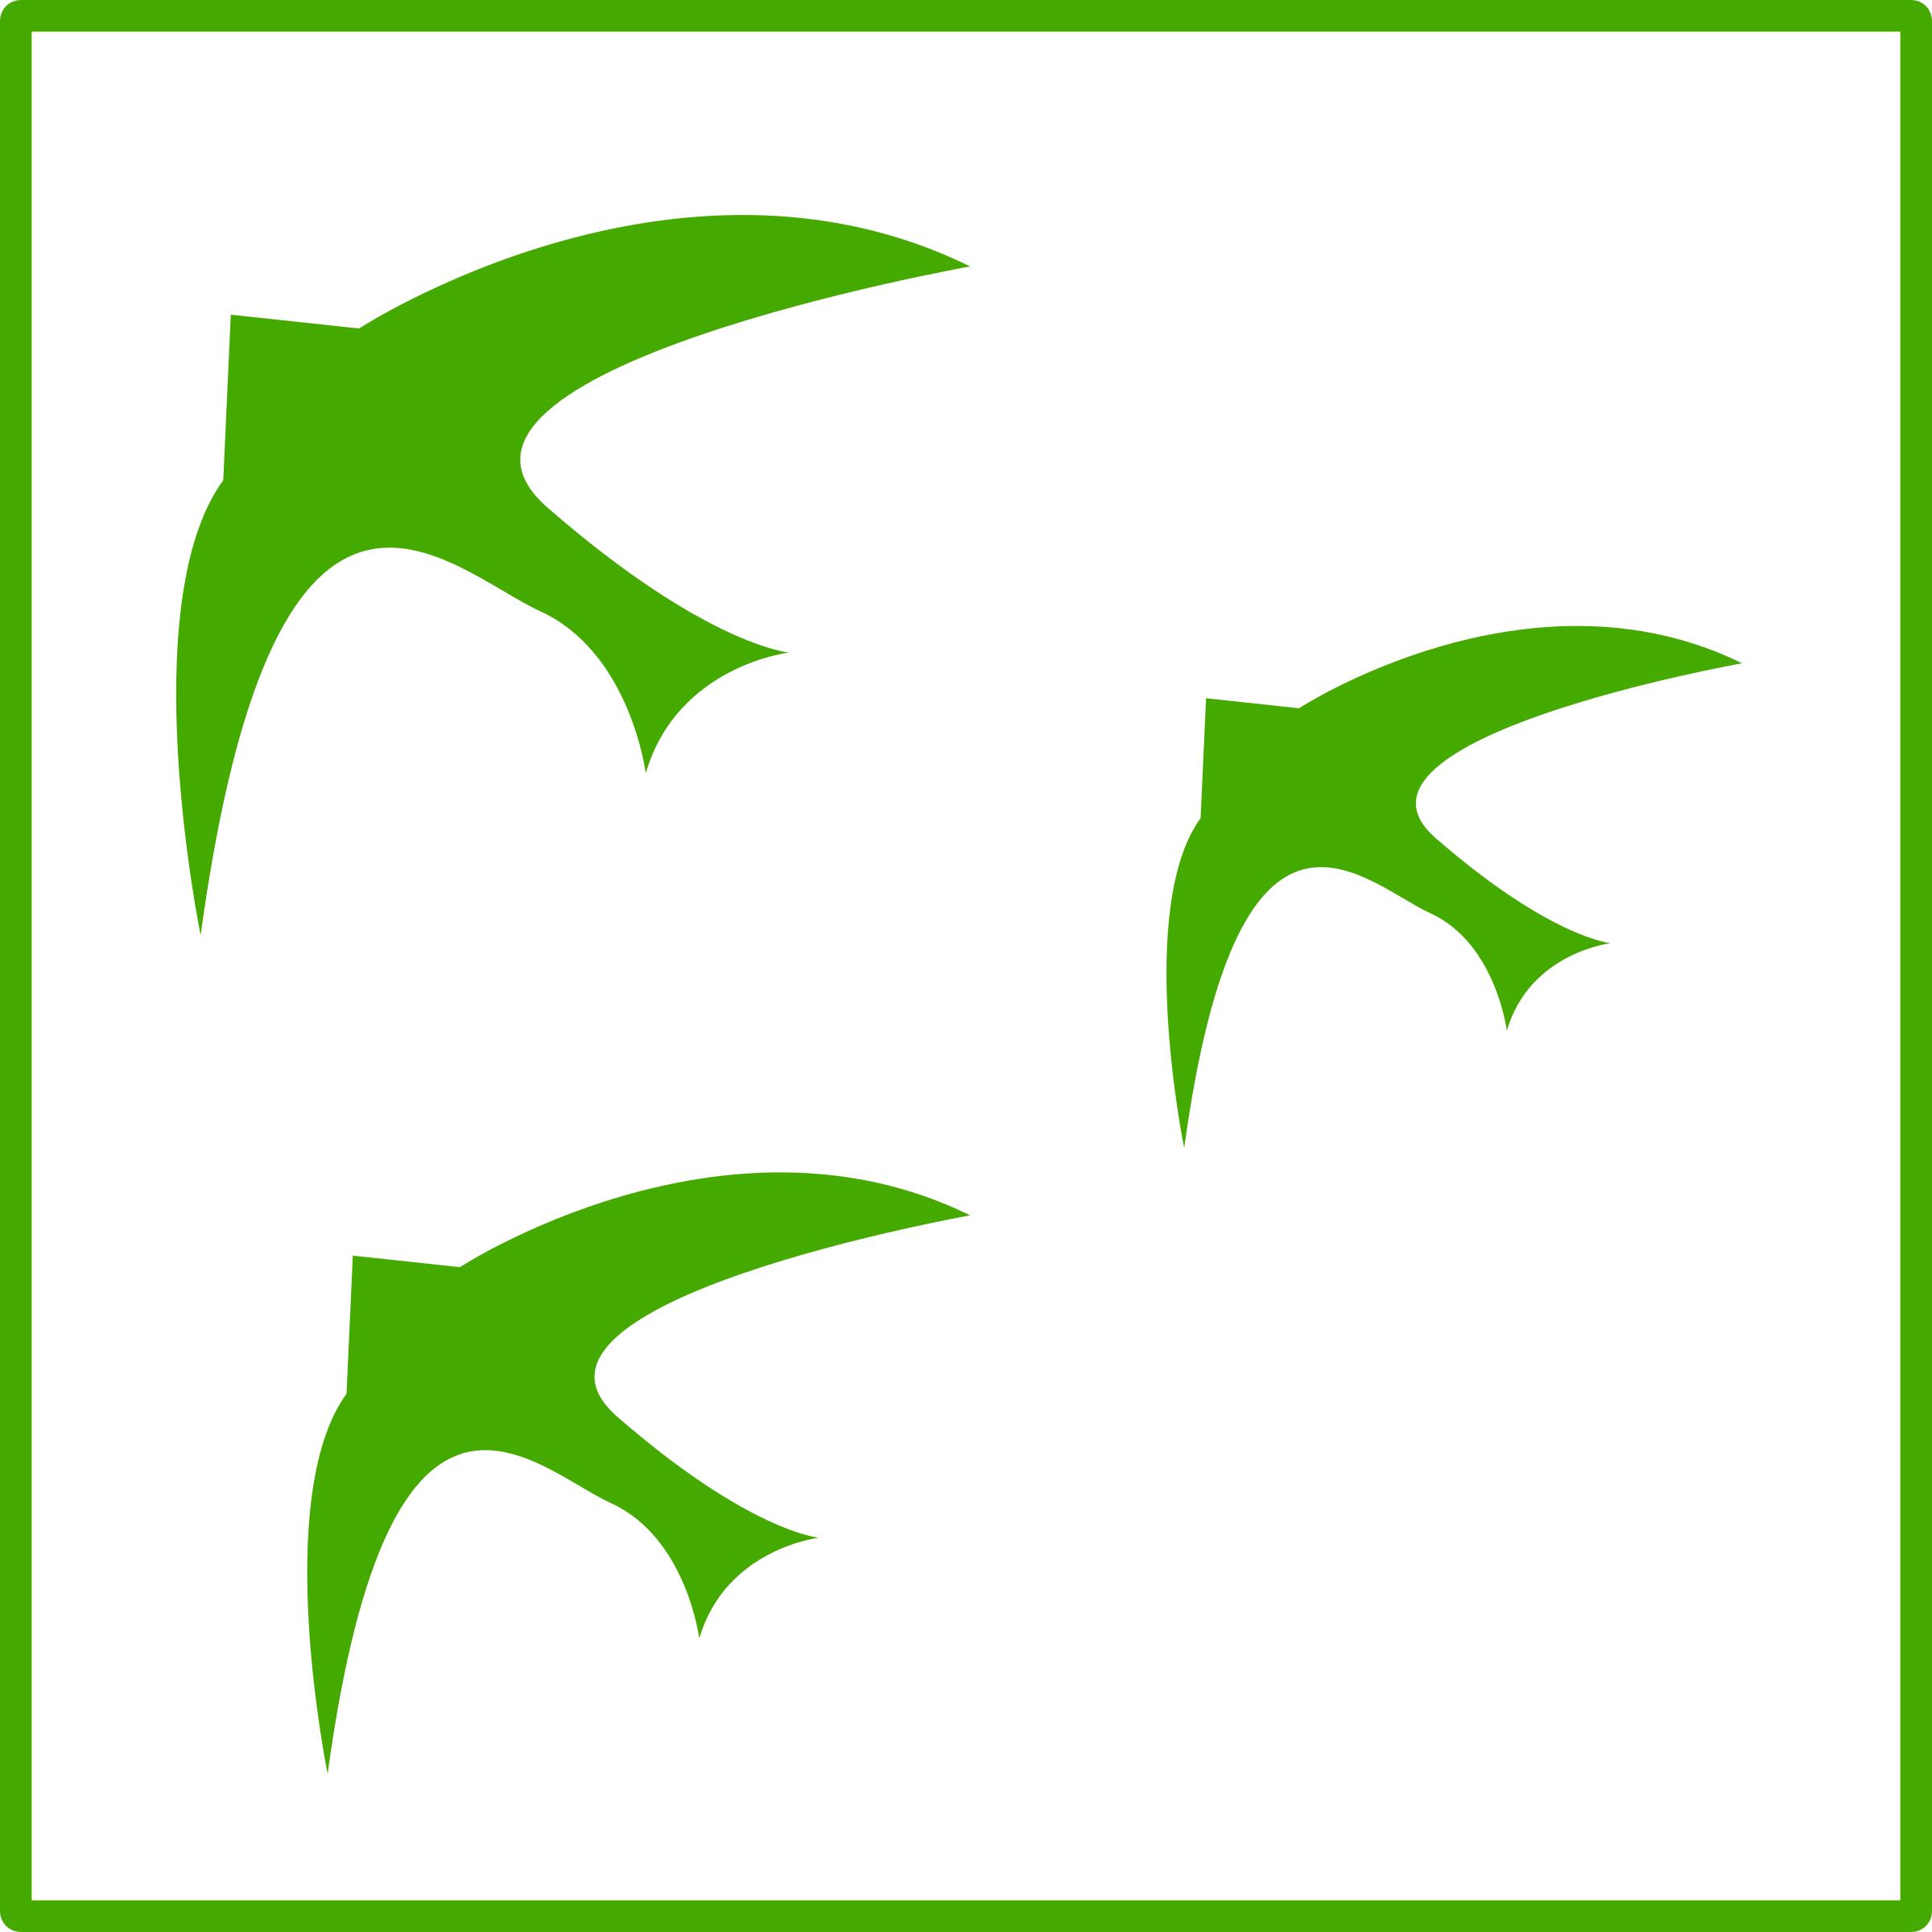 eco green  birds icon
 png